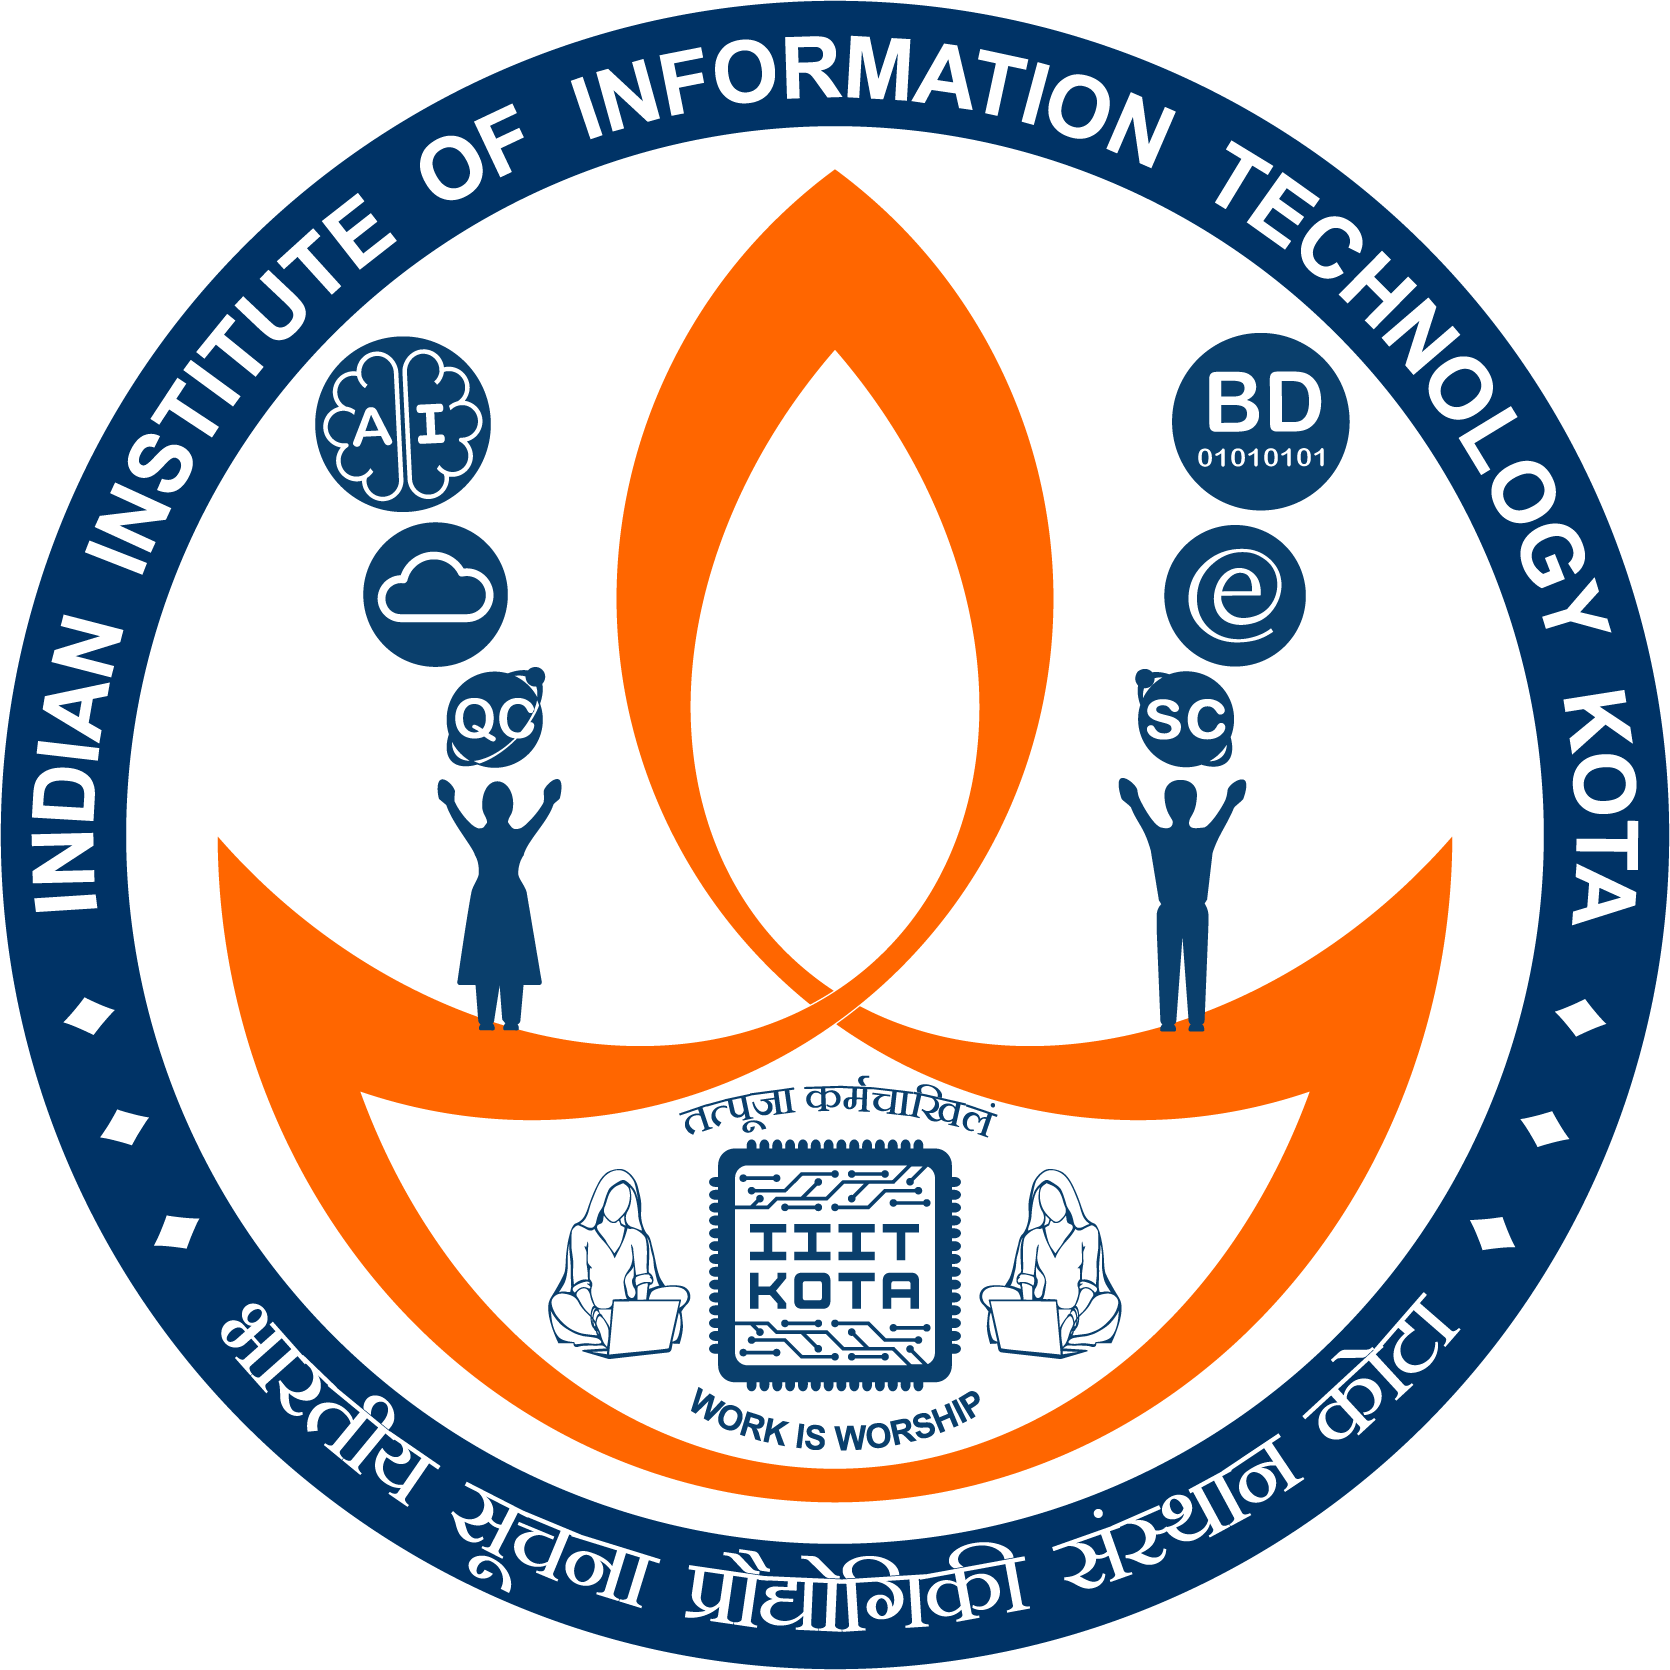 INDIAN INSTITUTE OF INFORMATION TECHNOLOGY, KOTA